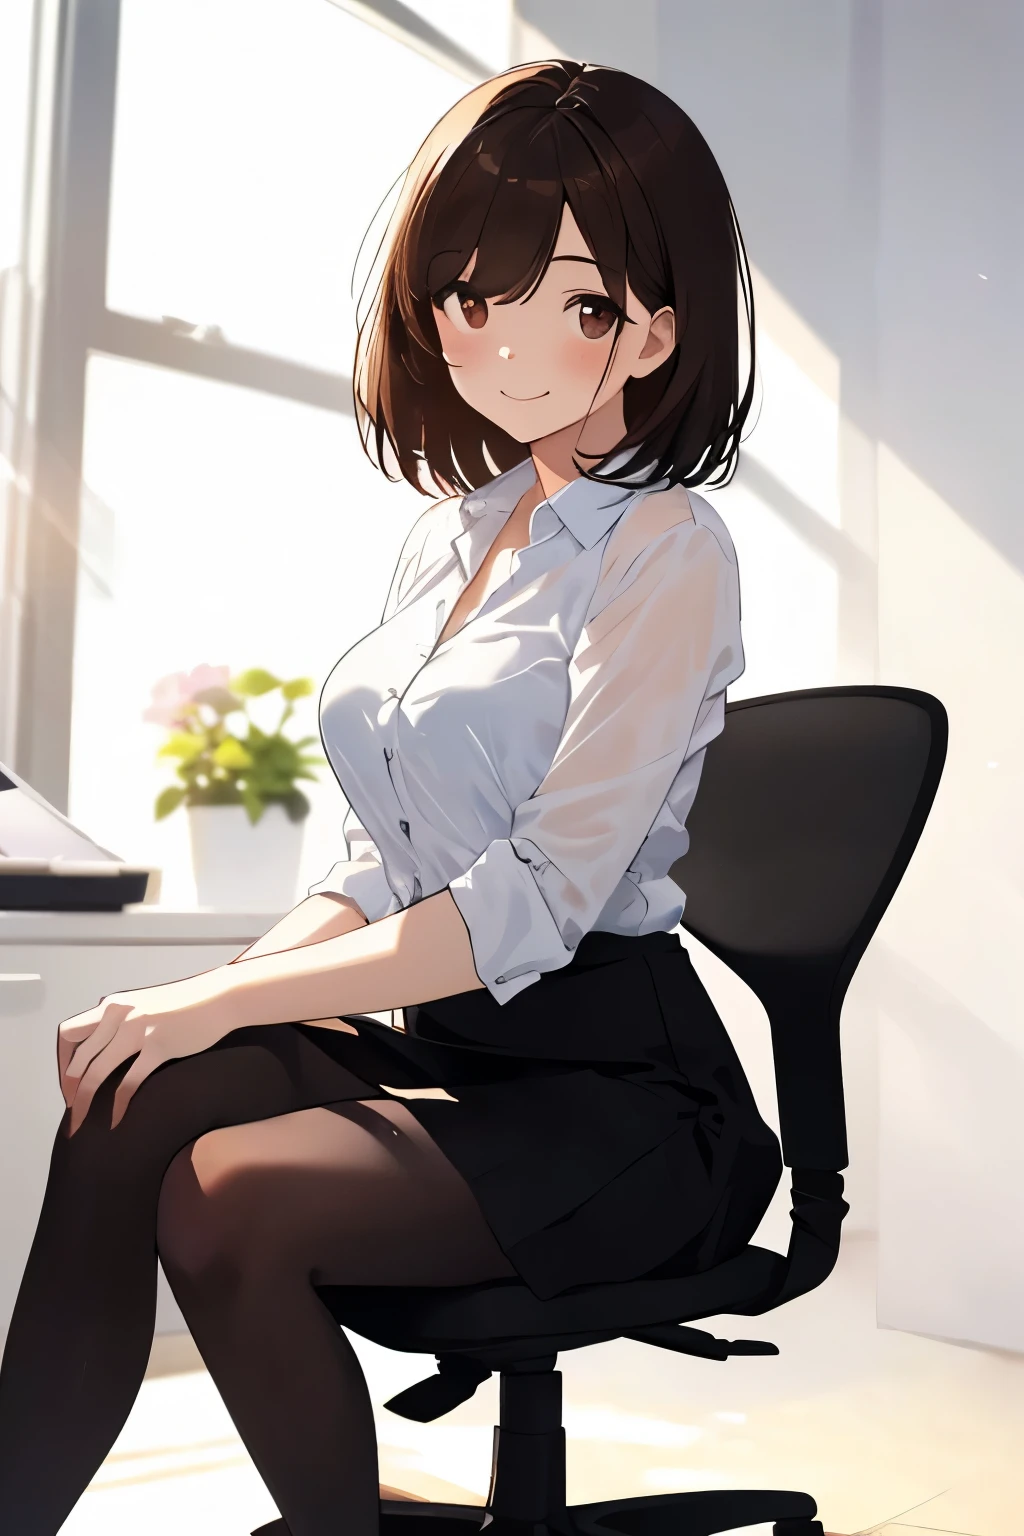 best quality, masterpiece, solo, 1 Female、Age 25、Larger breasts、(Slender figure)、From the side、(sitting in an office chair)、office lady、Poses that emphasize the chest、Sheer white shirt、skirt、tights、(White highlight in pupil:1.2)、Dark reddish brown eyes、(Black-haired:1.2)、(Medium Hair)、(View your viewers:1.2)、White skin、(blush)、(A shy smile)、(A sad expression)、(I blur the background a lot to make the woman stand out.:1.3)、(The sunlight shines in)、Beautiful flowers in the background